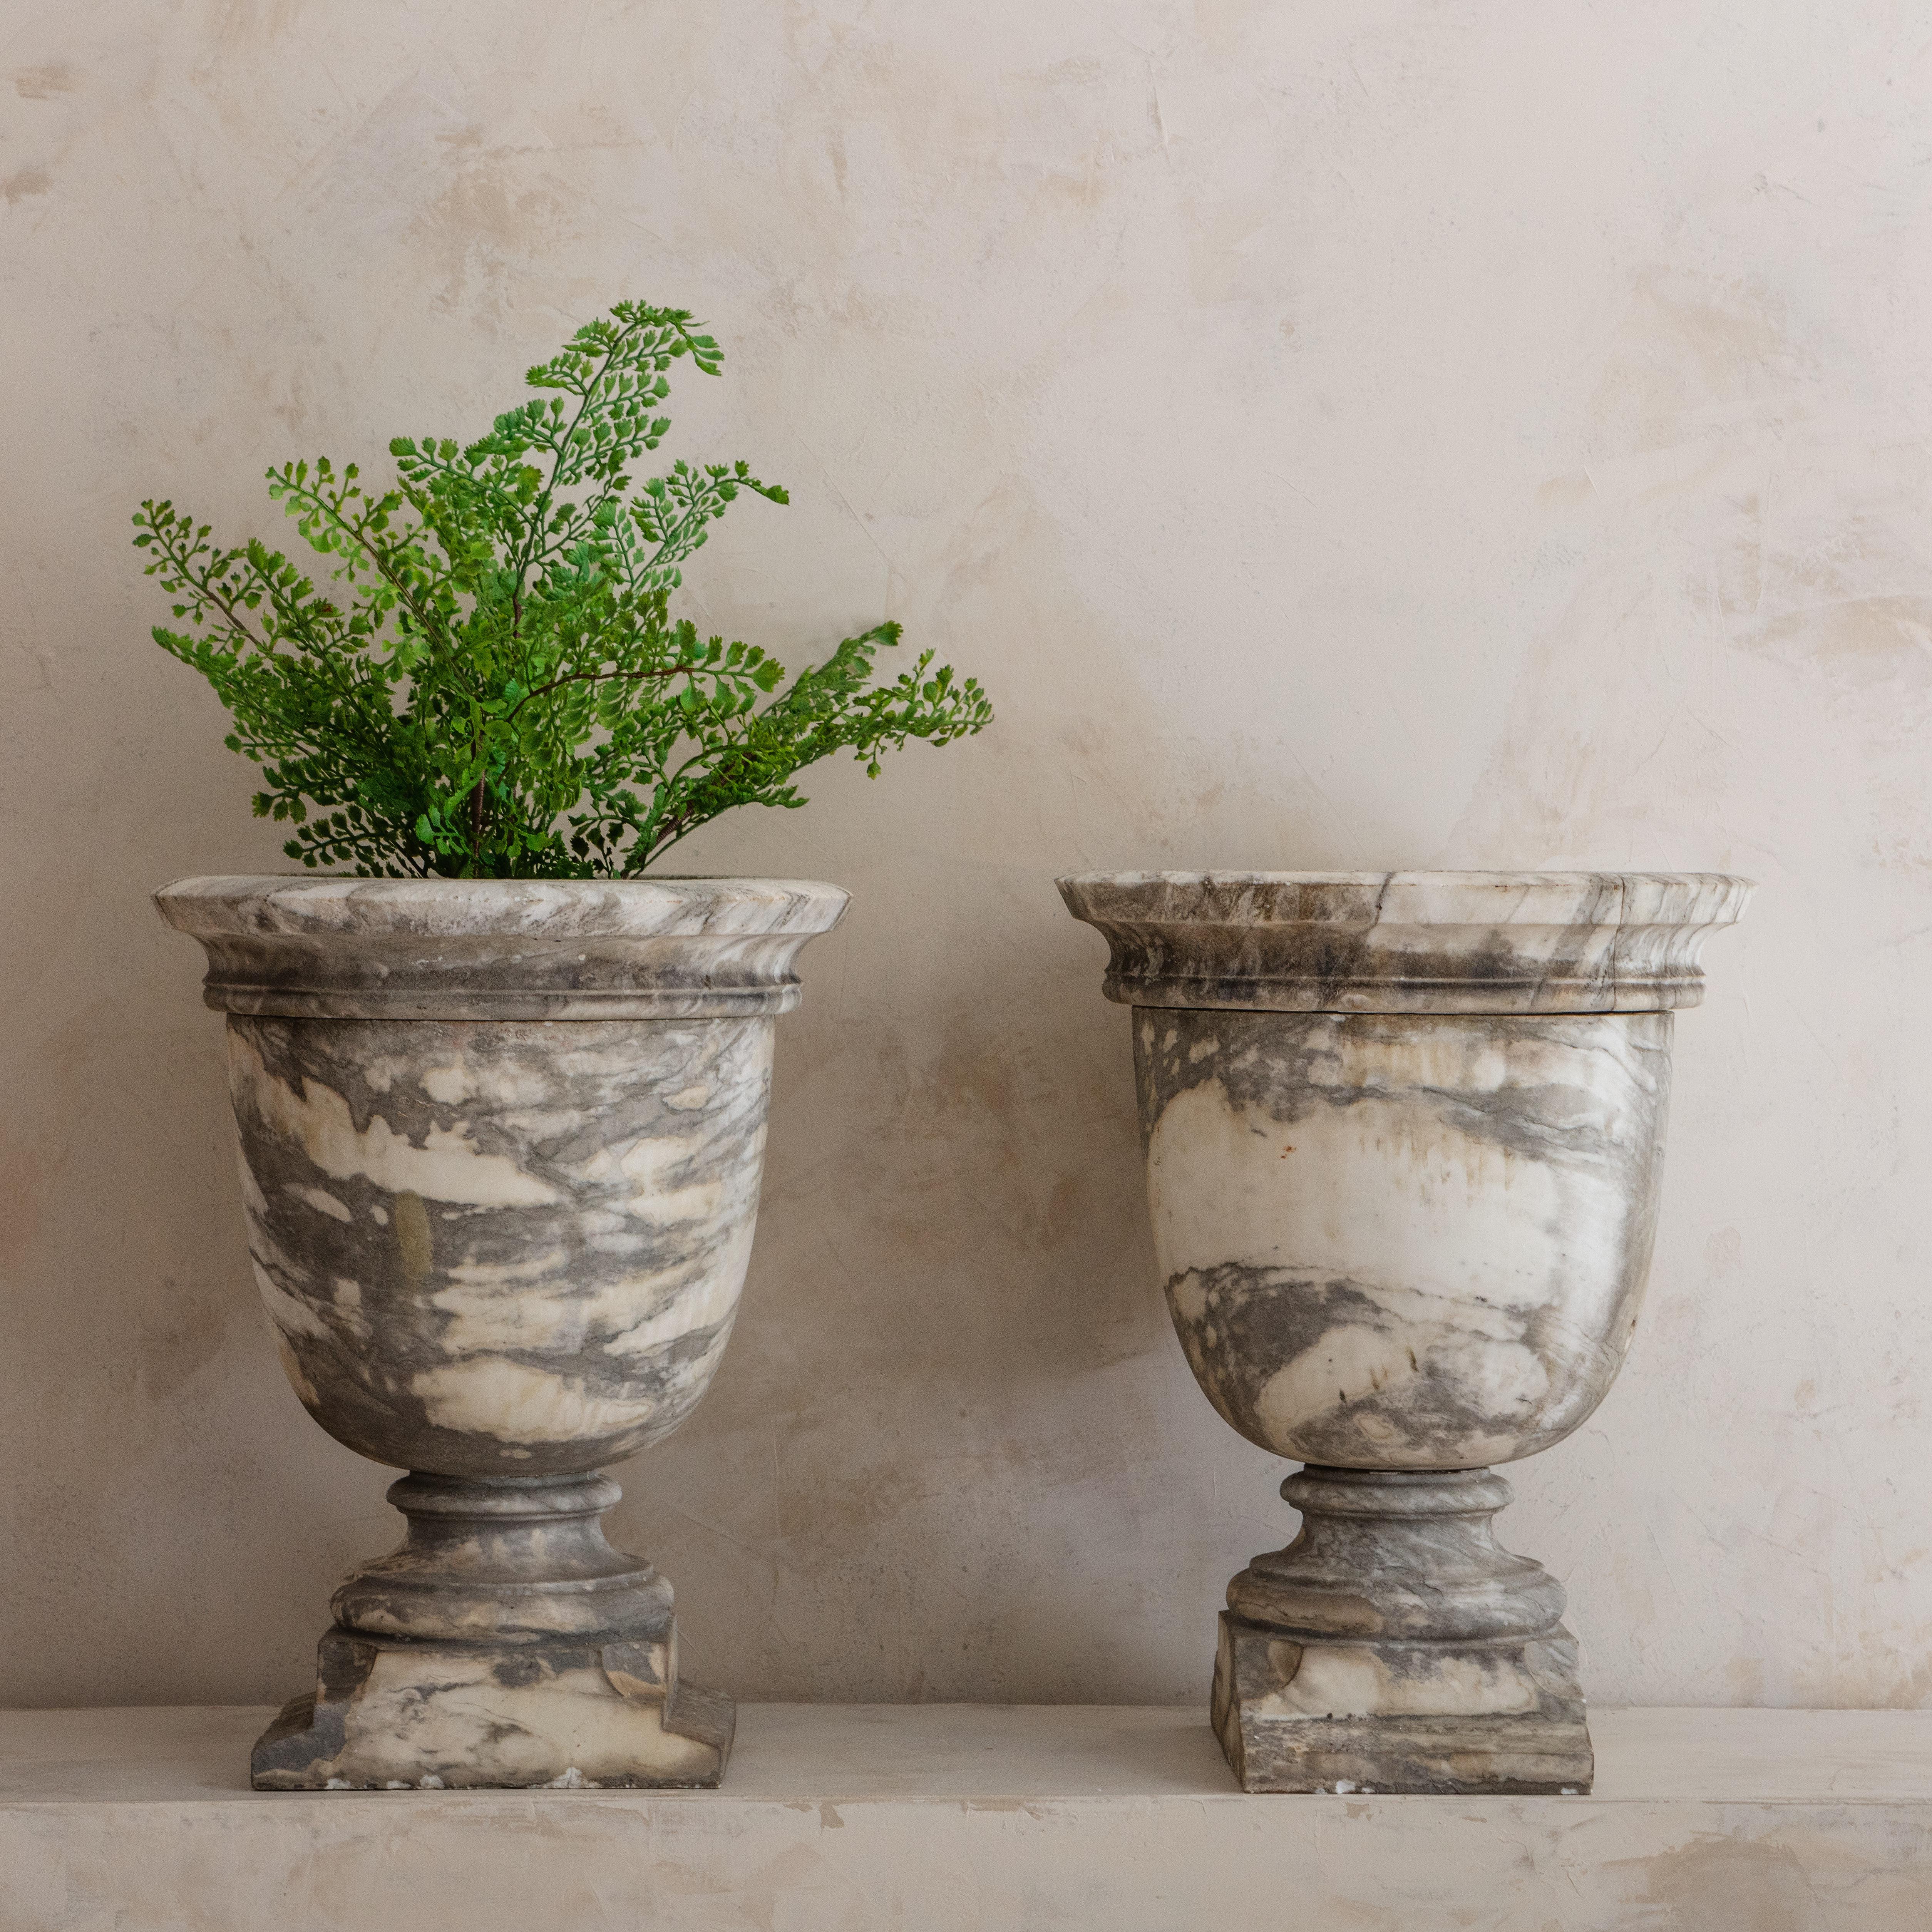 A unique pair of marble urns source in Paris, France. Feauturing a stunning honed white marble with heavy deep gray veining. Each urn has an interior diameter of 6.75” and 6.75” deep.